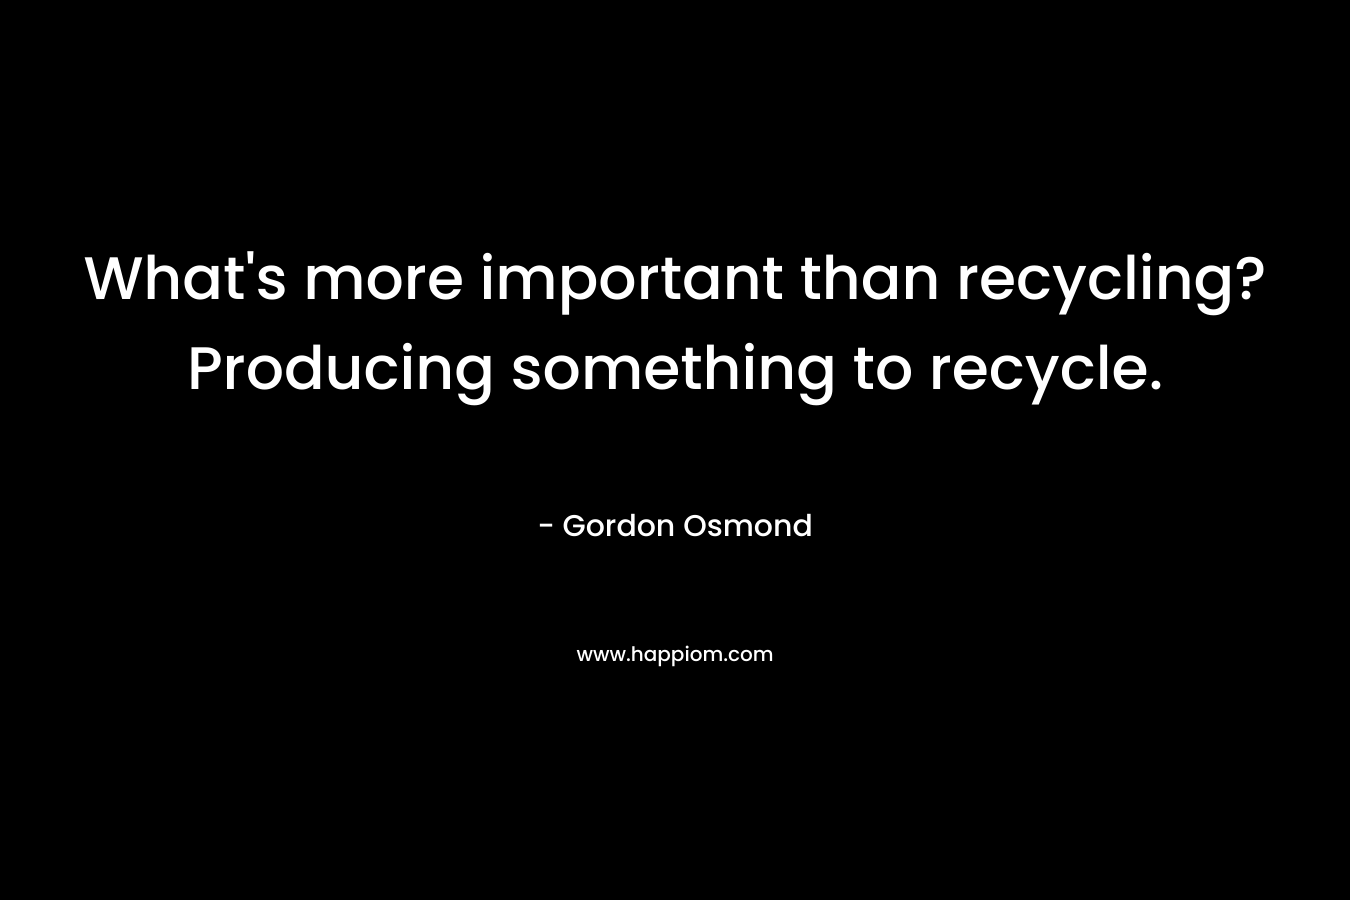 What's more important than recycling? Producing something to recycle.